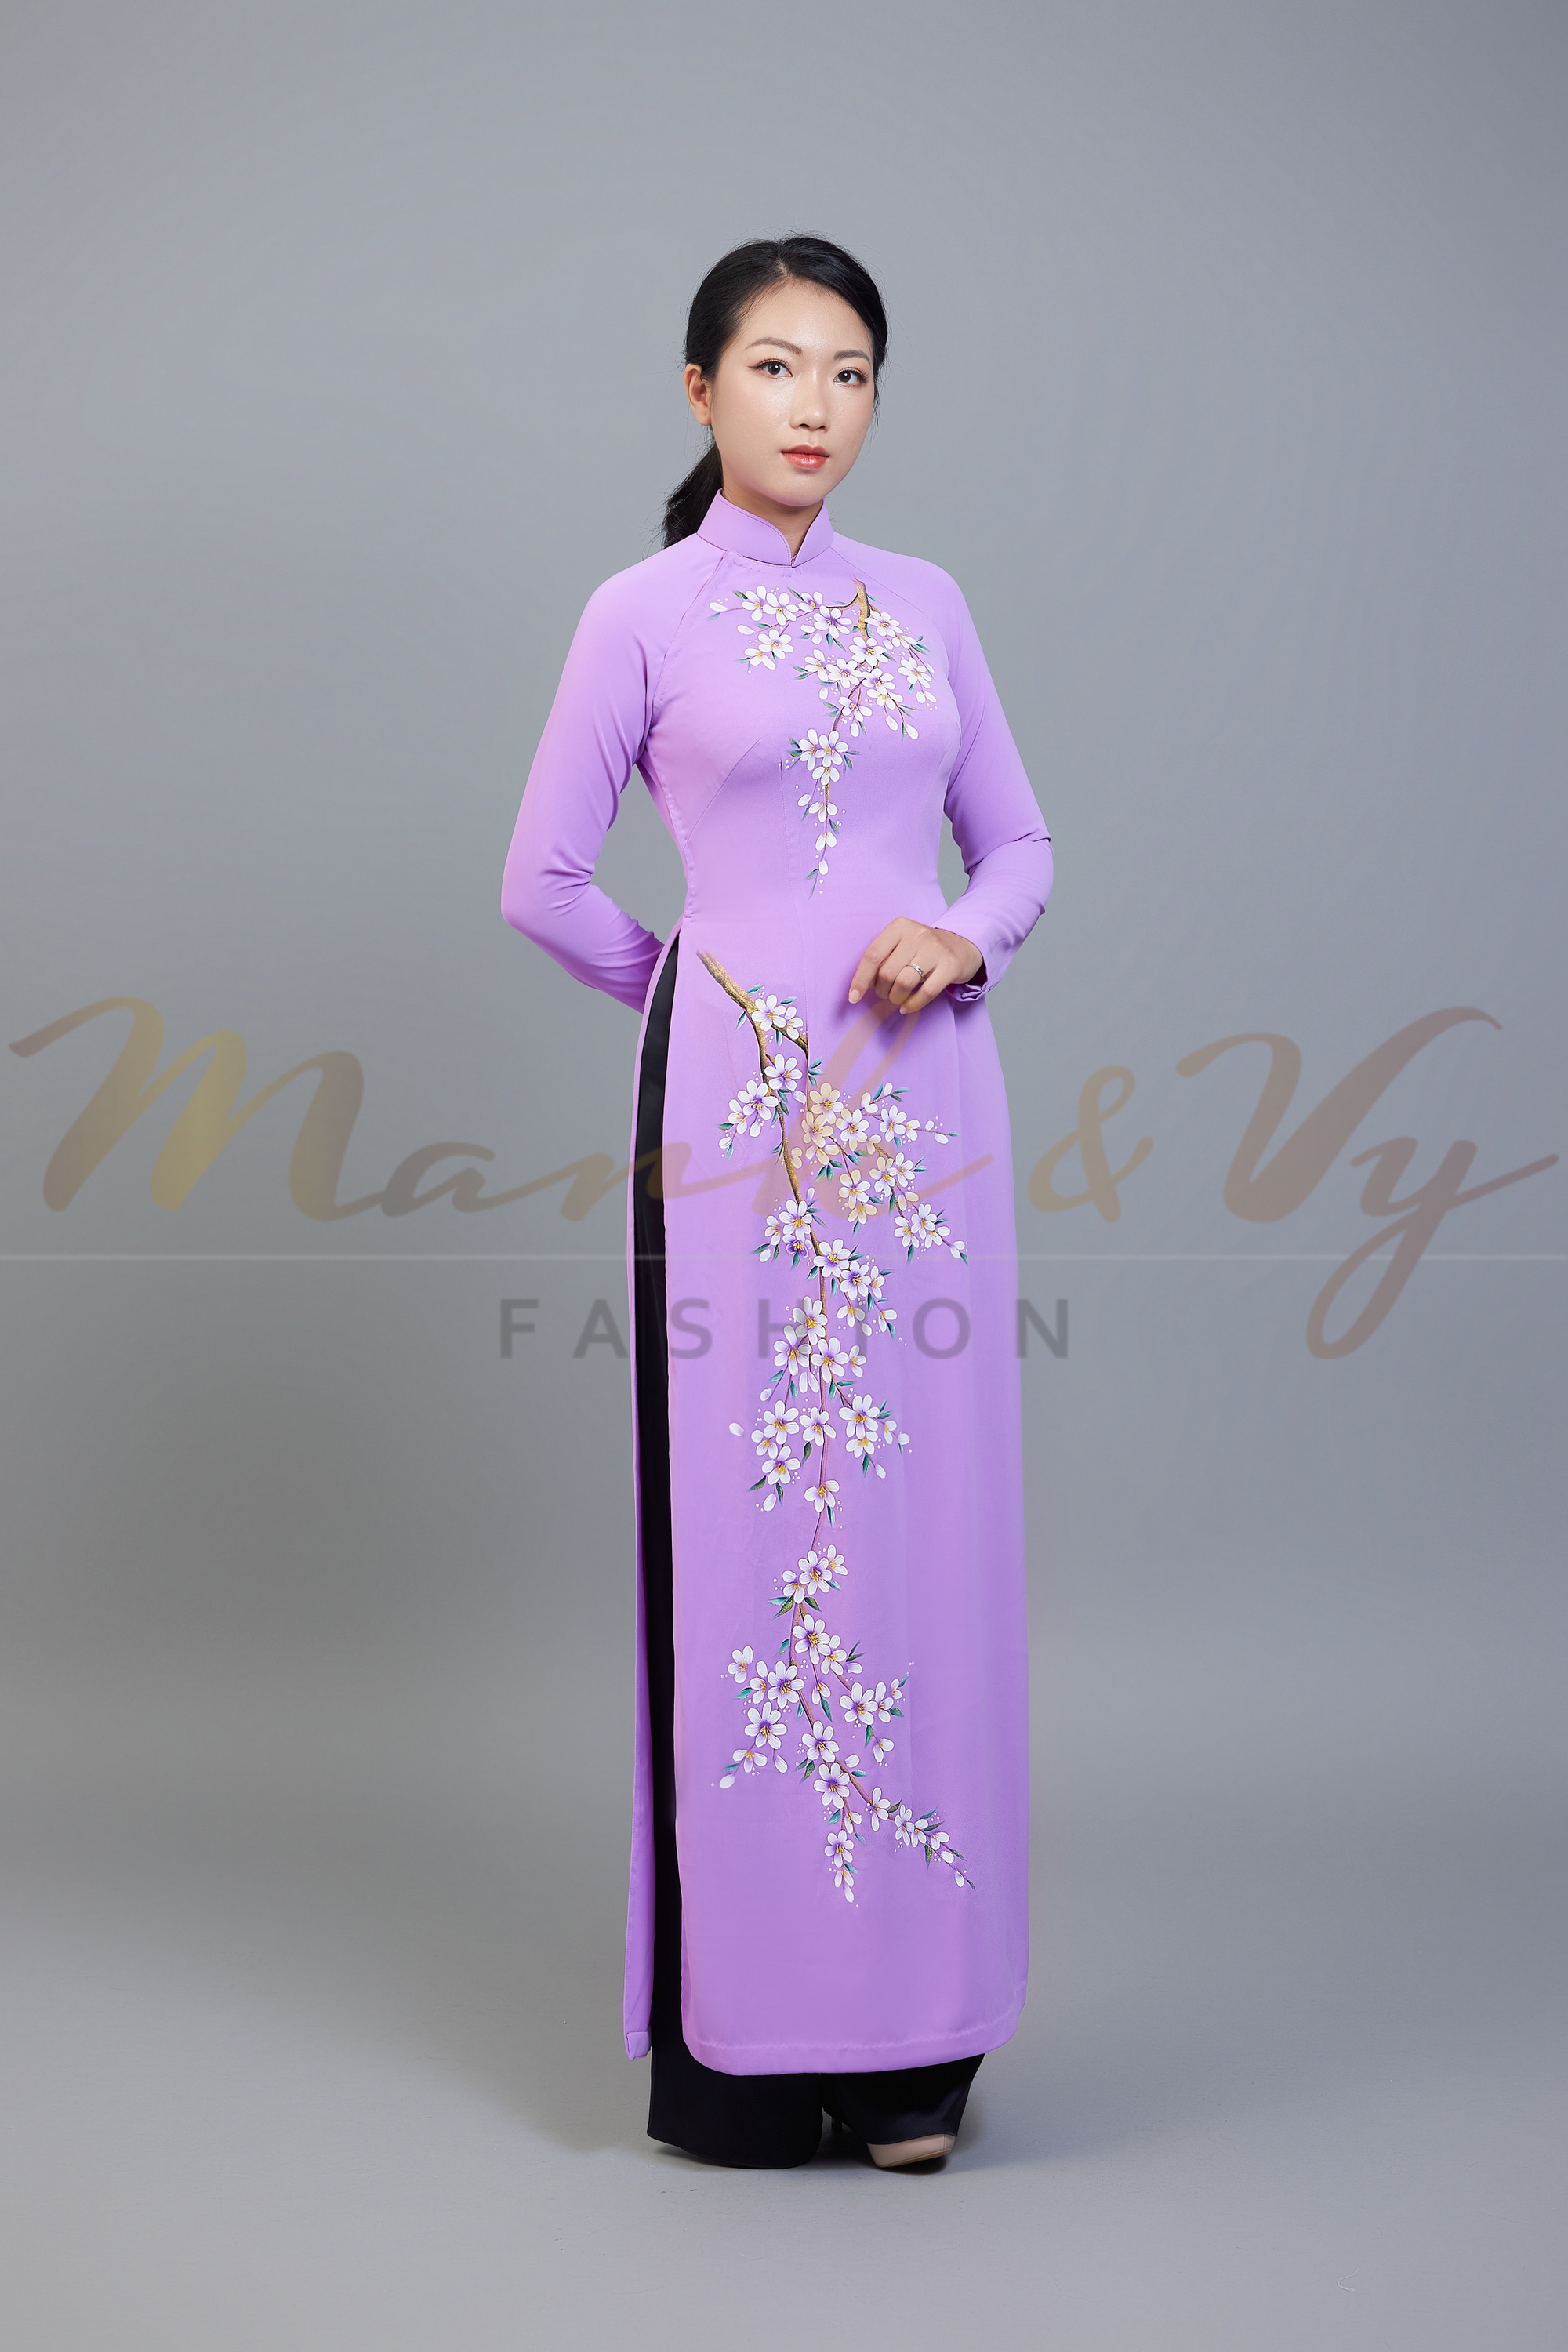 Custom made ao dai. Unique, hand-painted, floral motif on light purple fabric.